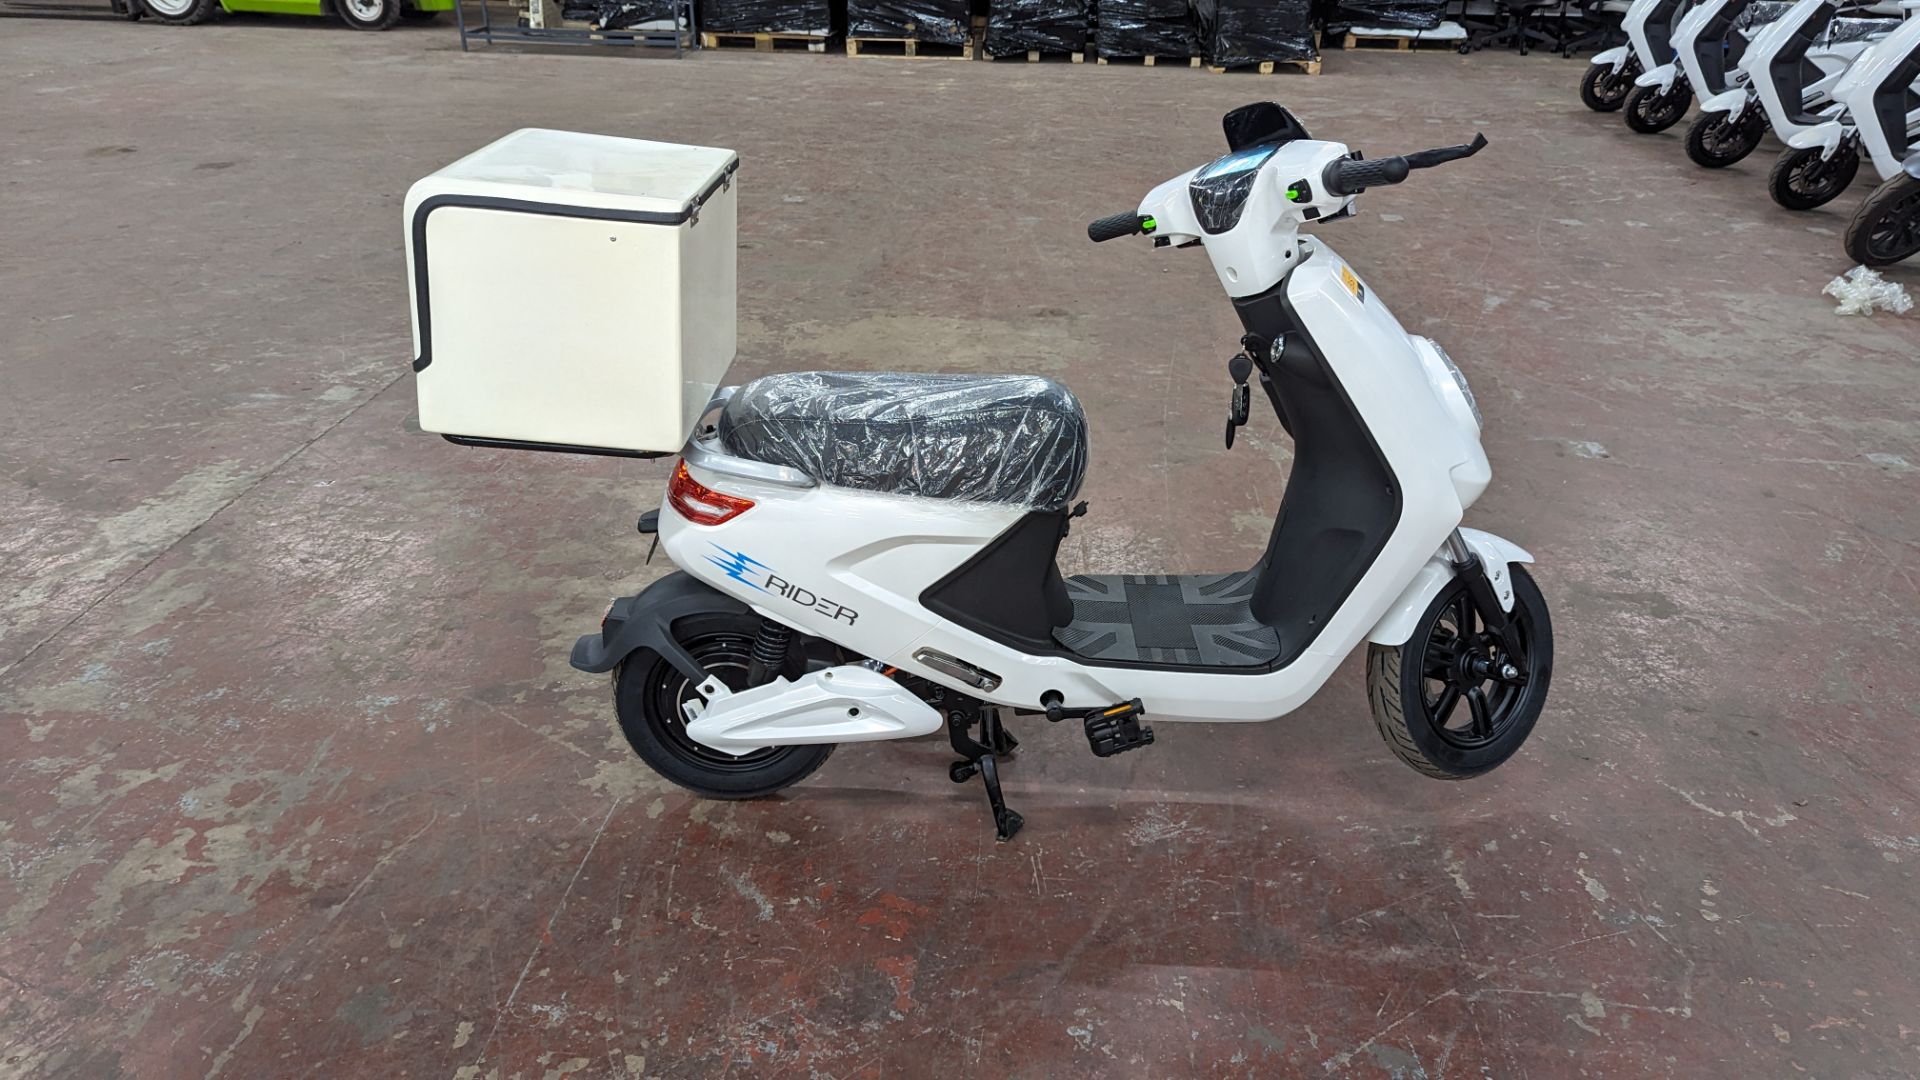 Model 18 Electric Bike: Zero (0) recorded miles, white body with black detailing, insulated box moun - Image 7 of 13